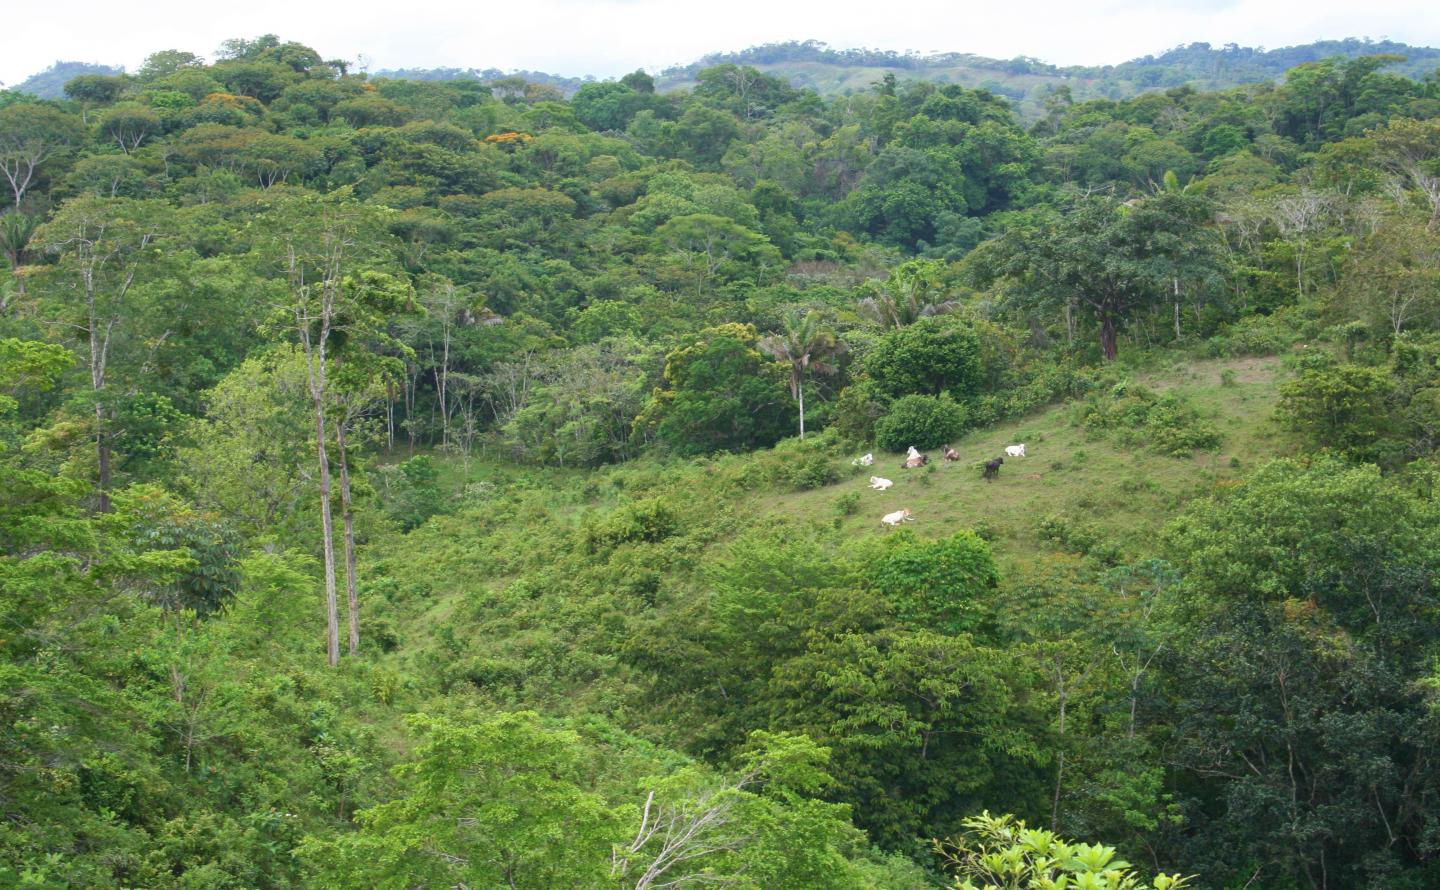 Reforestation is an important strategy to protect the tropical carbon sink.